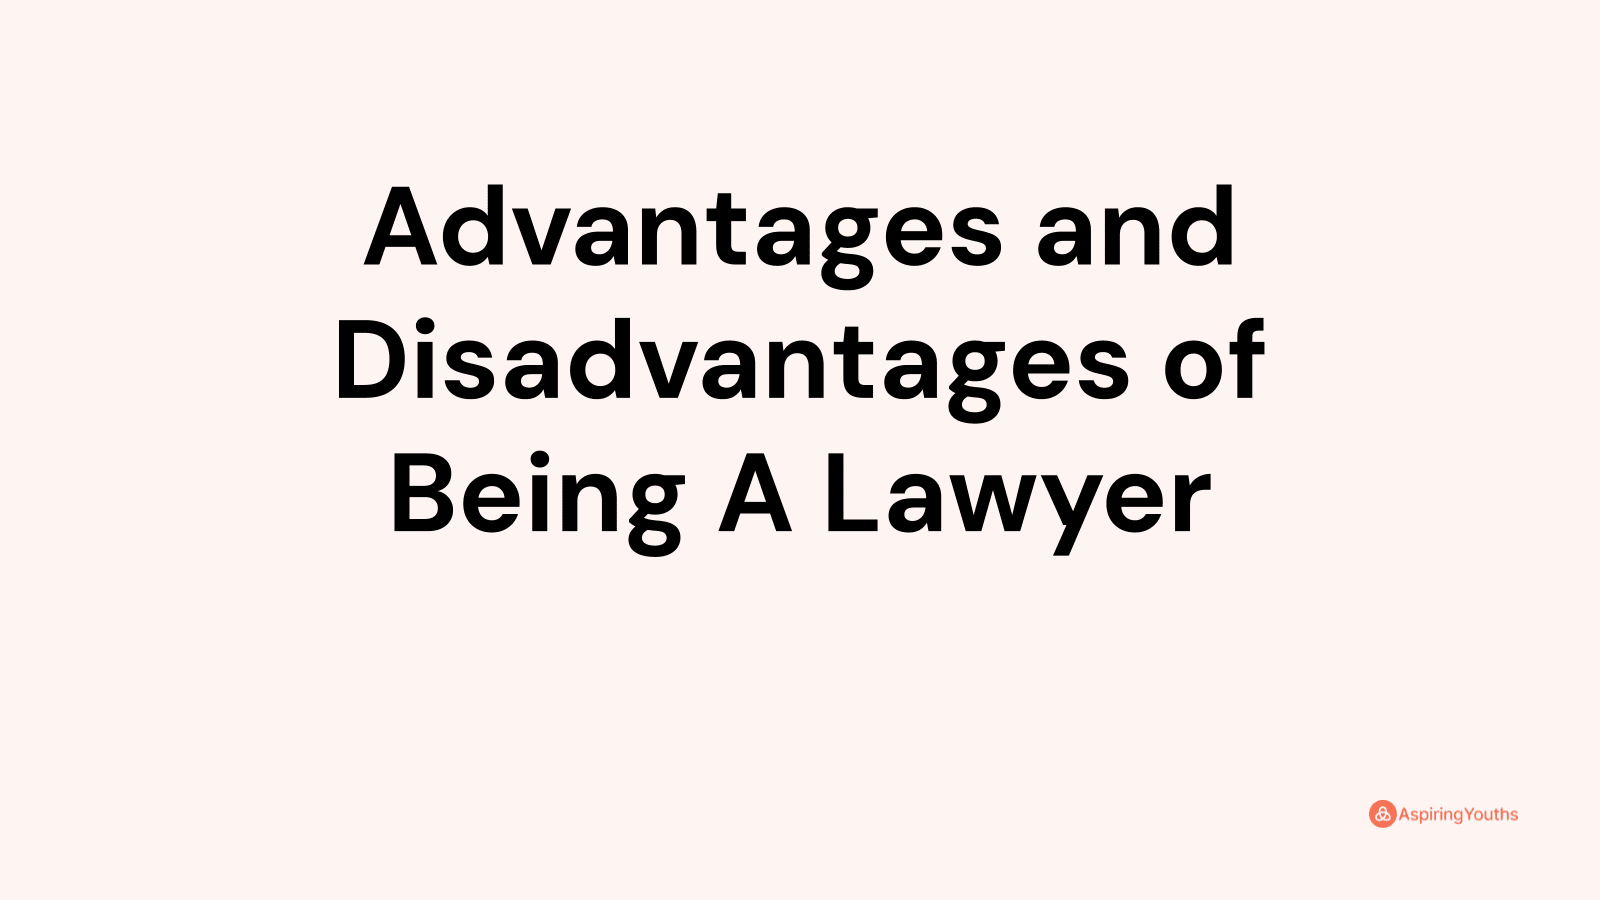 Advantages and disadvantages of Being A Lawyer